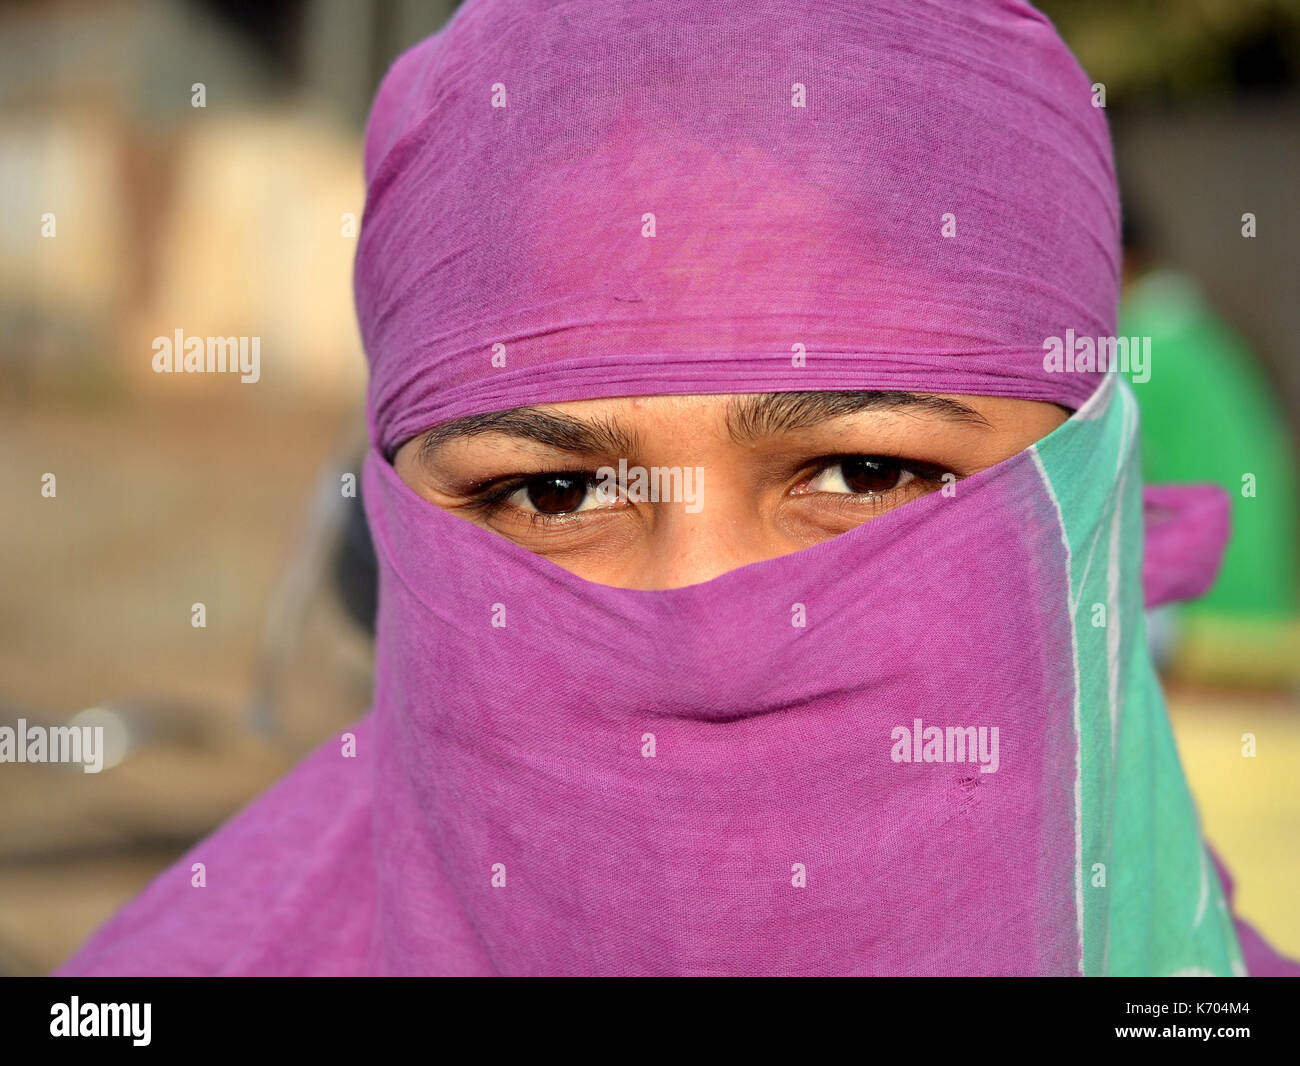 Young Indian woman with scrutinizing eyes covers her hair and face with a trendy secular headscarf and poses for the camera. Stock Photo